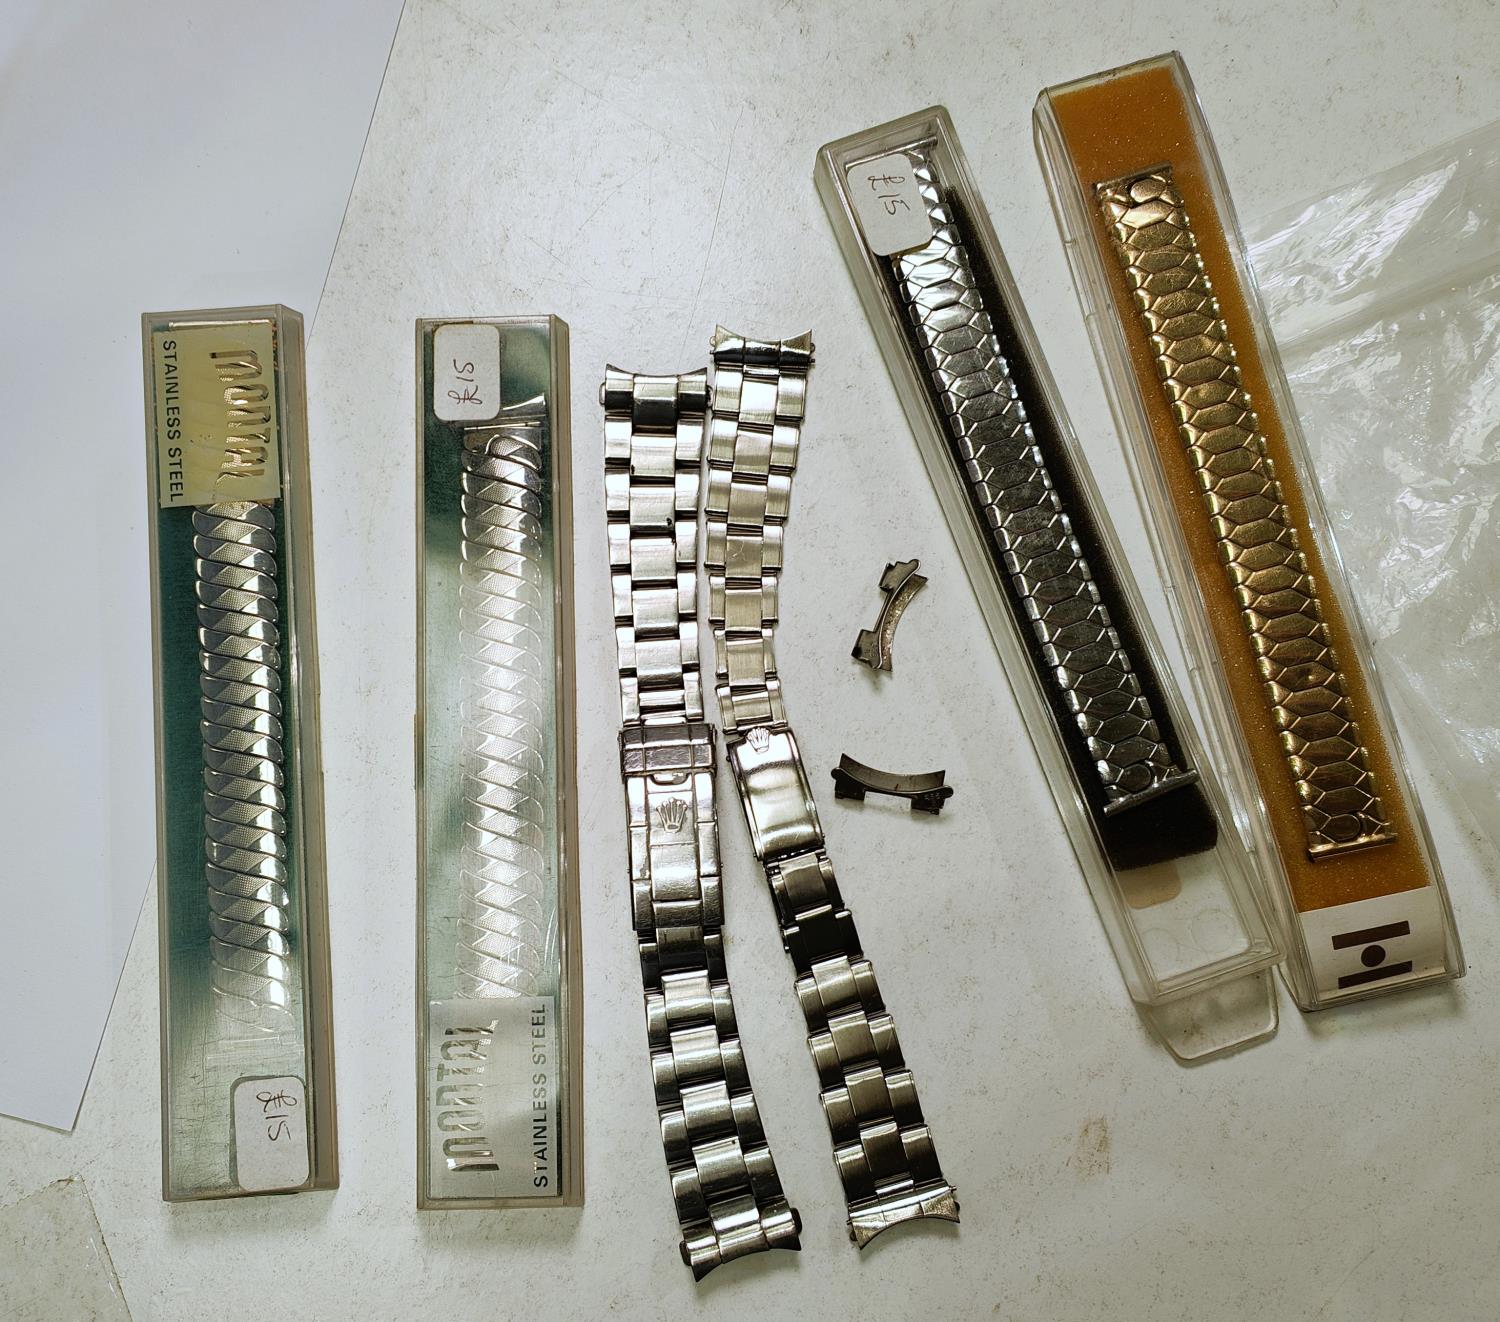 A riveted Rolex stainless steel watch strap, another dive style watch strap and other various